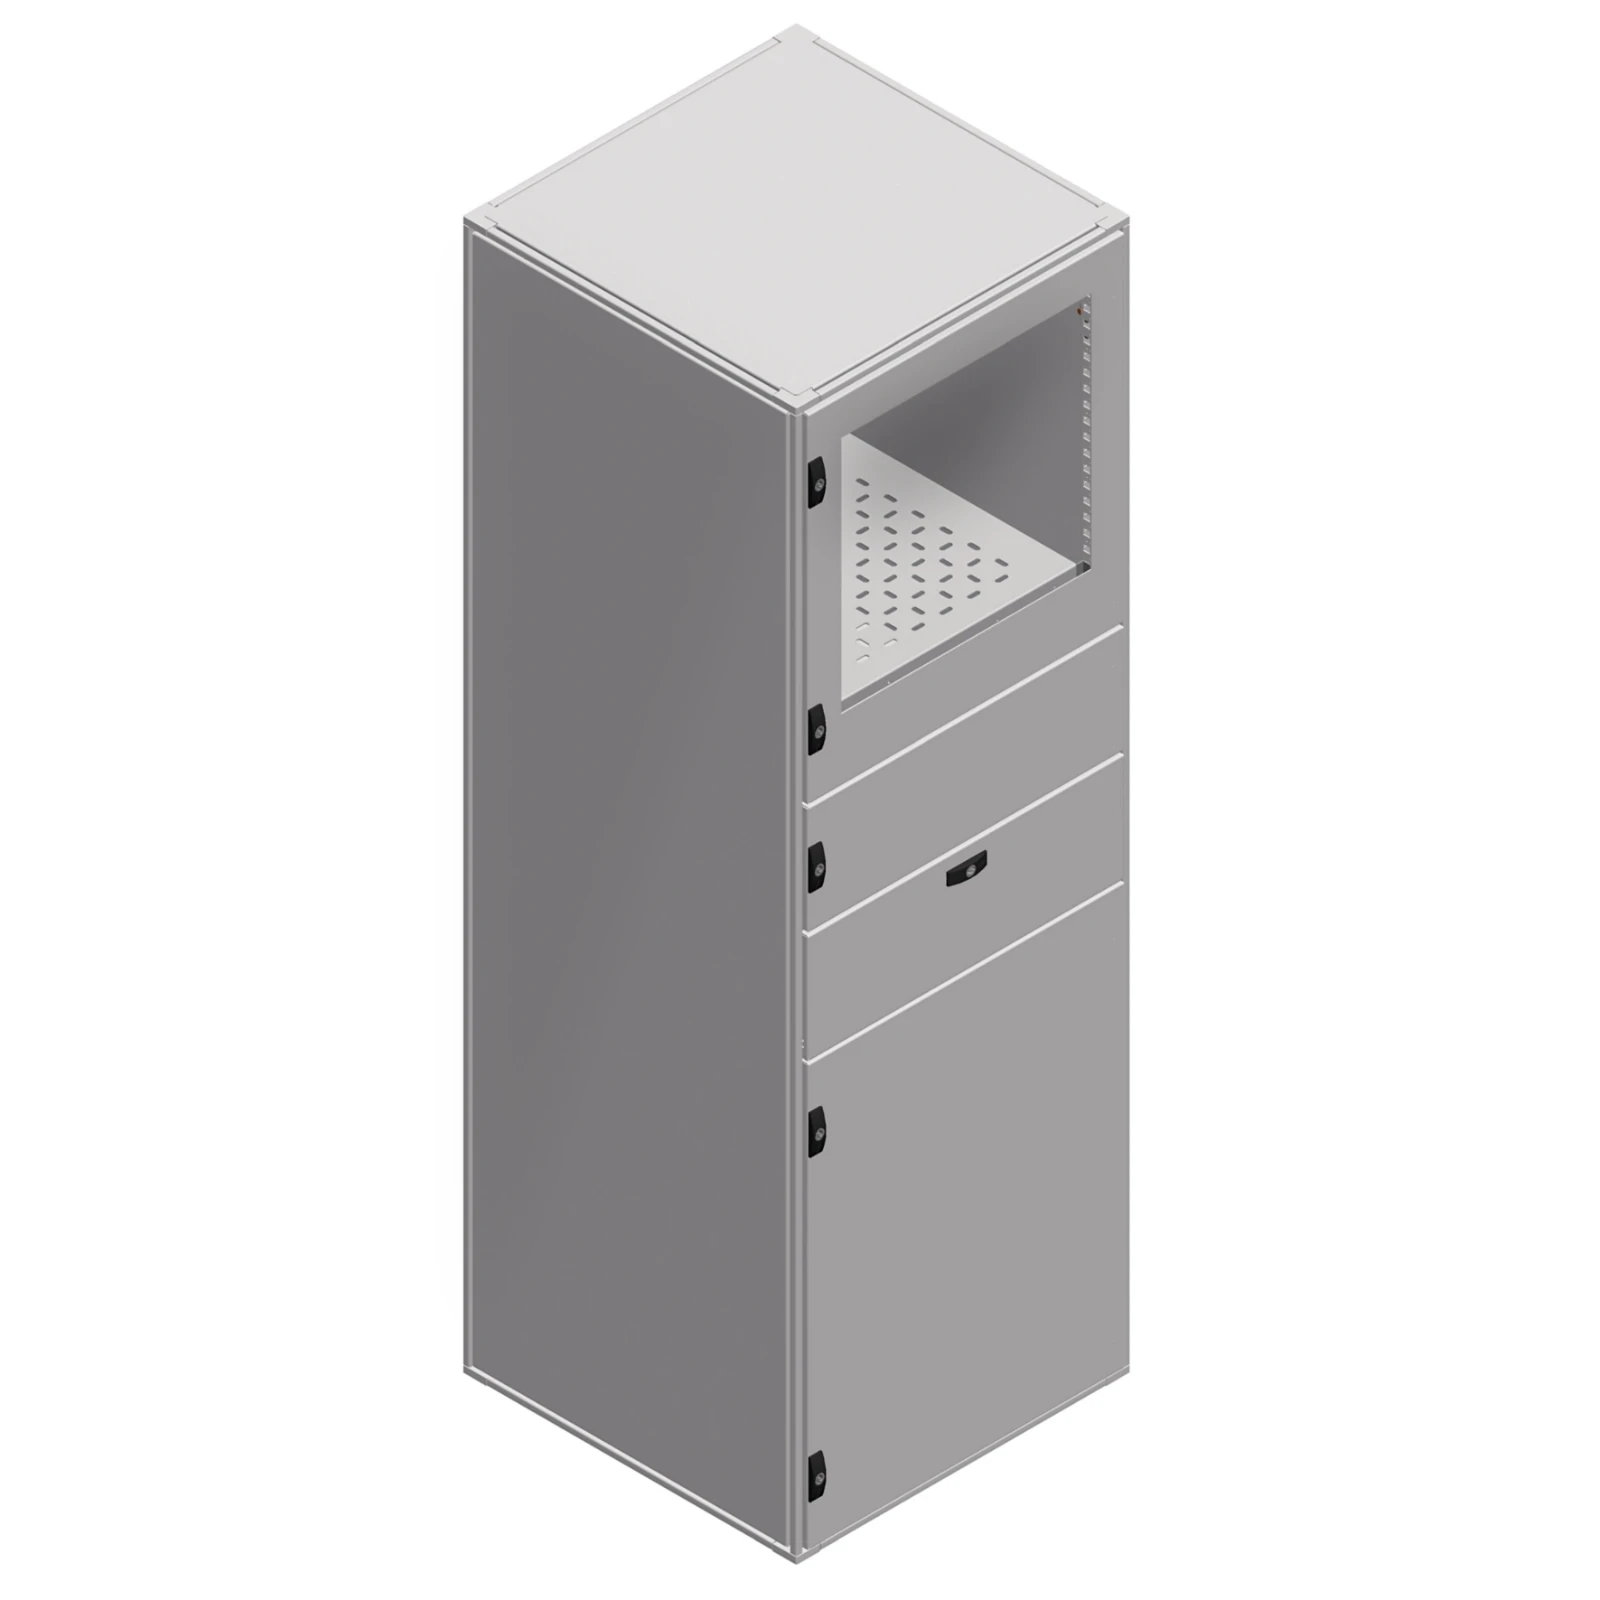 Schneider Electric Kast/behuizing voor PC, monitor of periferie NSYSF16680PC